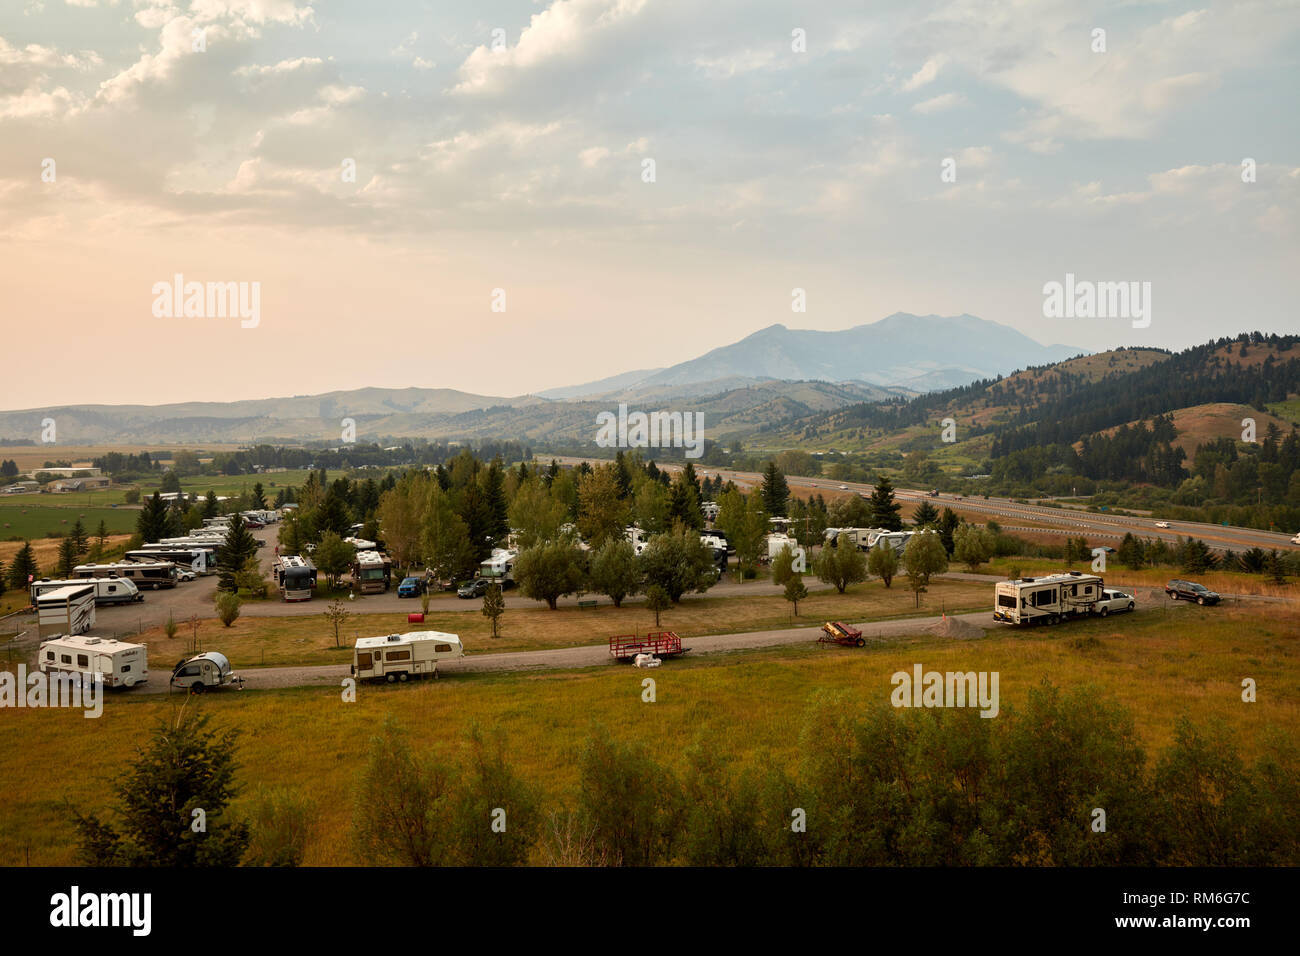 Bear Canyon Campground near Bozeman, Montana with mountains in the background Stock Photo